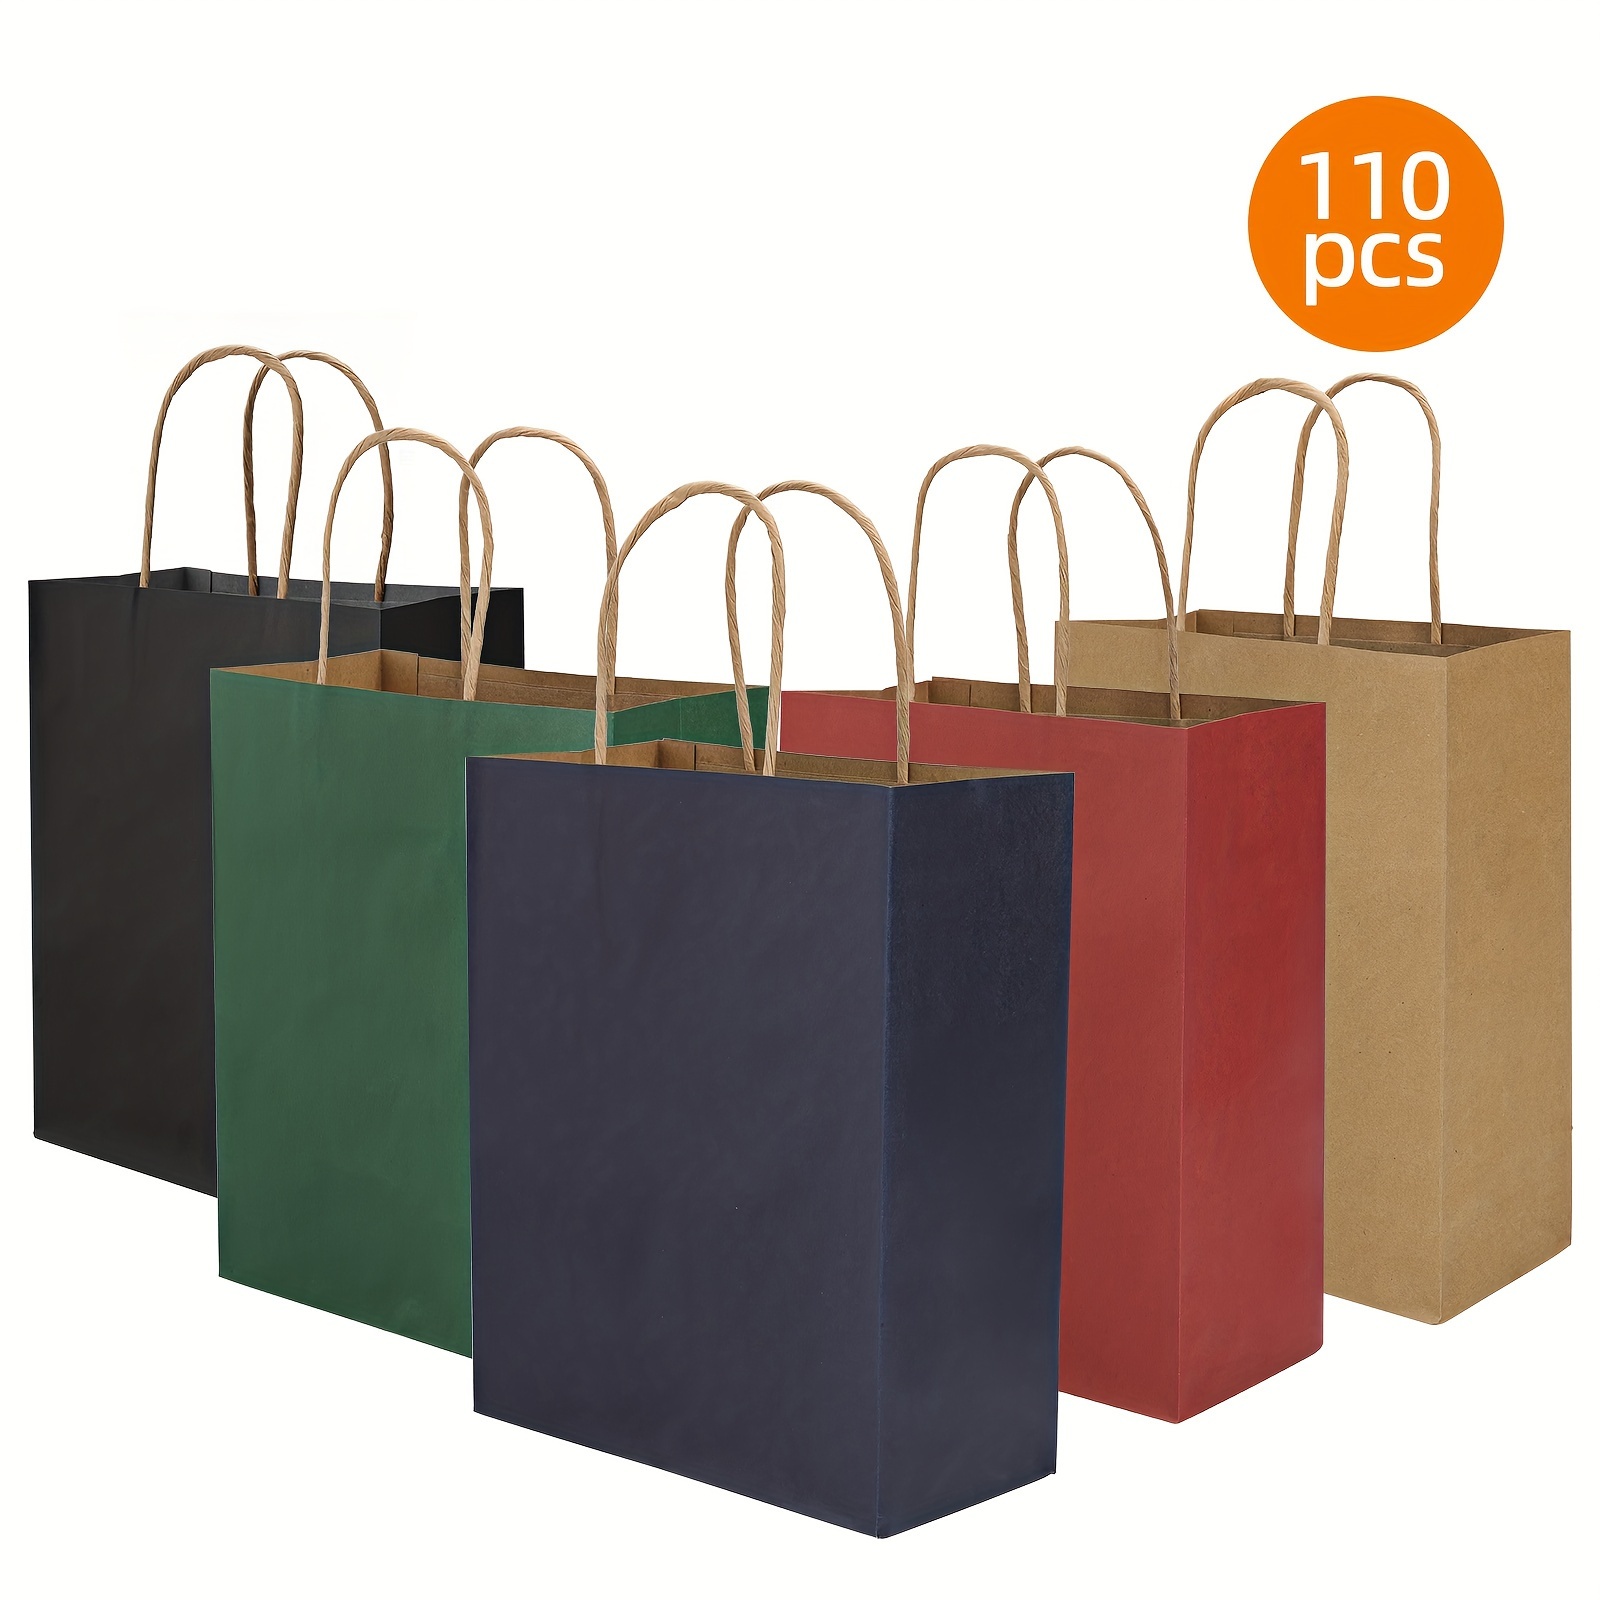 

110pcs Paper Bags With Handles, Medium Sizes Gift Bags Bulk, Multicolour, Paper Bags For Christmas, Small Business, Shopping Bags, Retail Bags, Party Bags, Favor Bags, 8x4x10 Inch